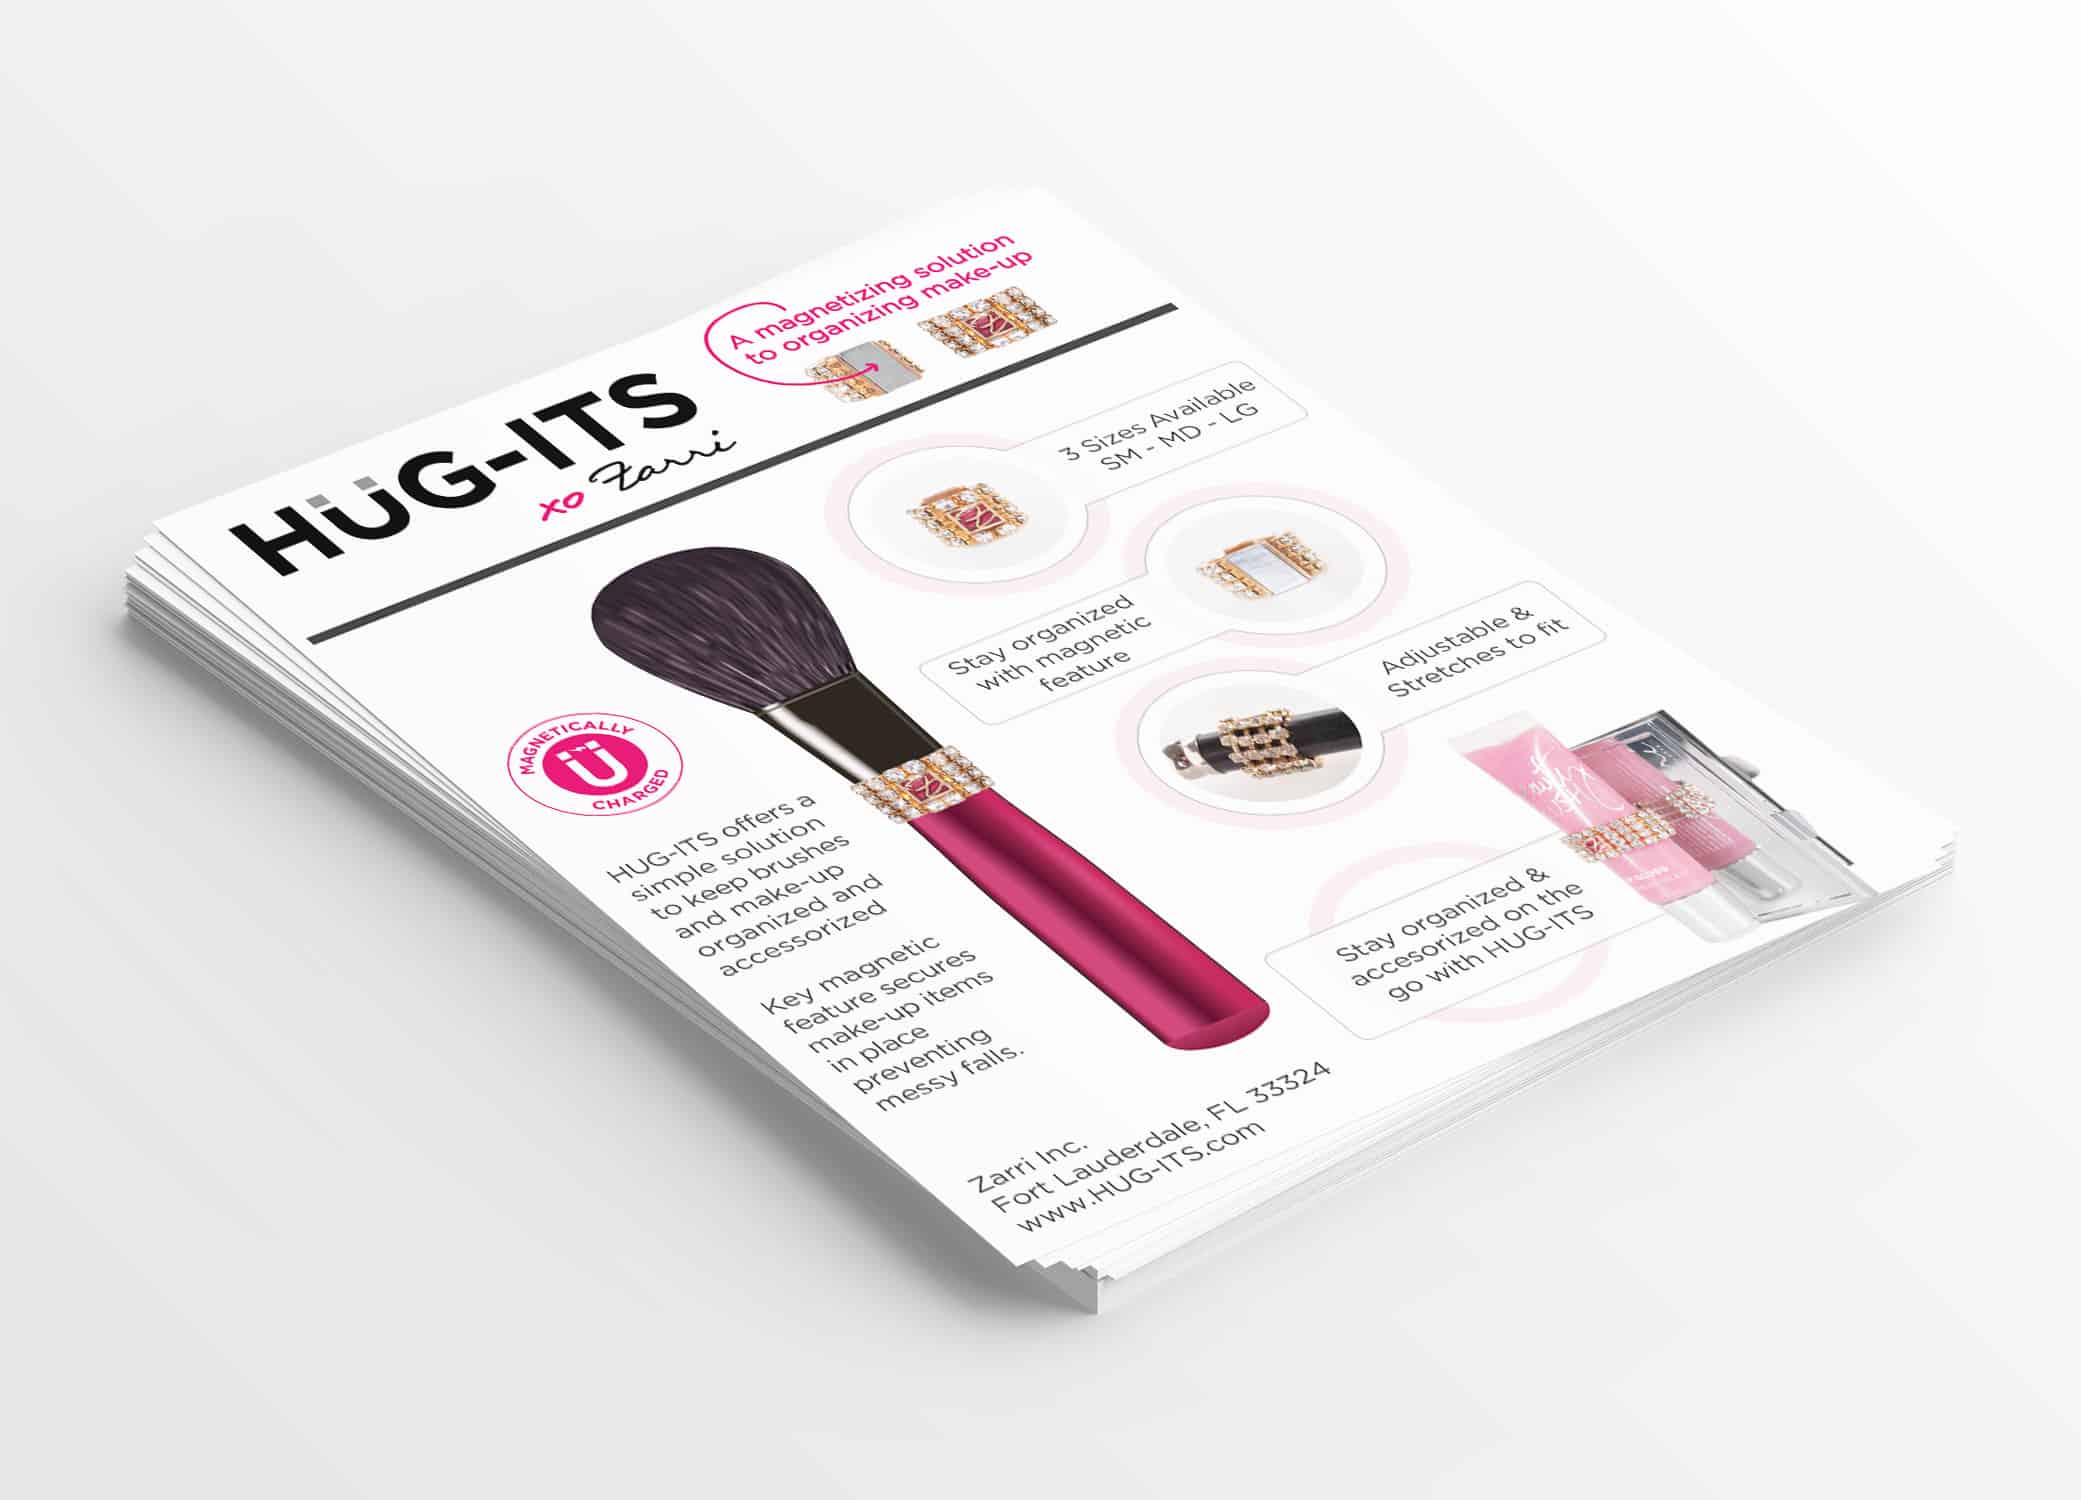 Hug-its promotional stacked flyers highlighting product features of magnetically charged brush and elements.